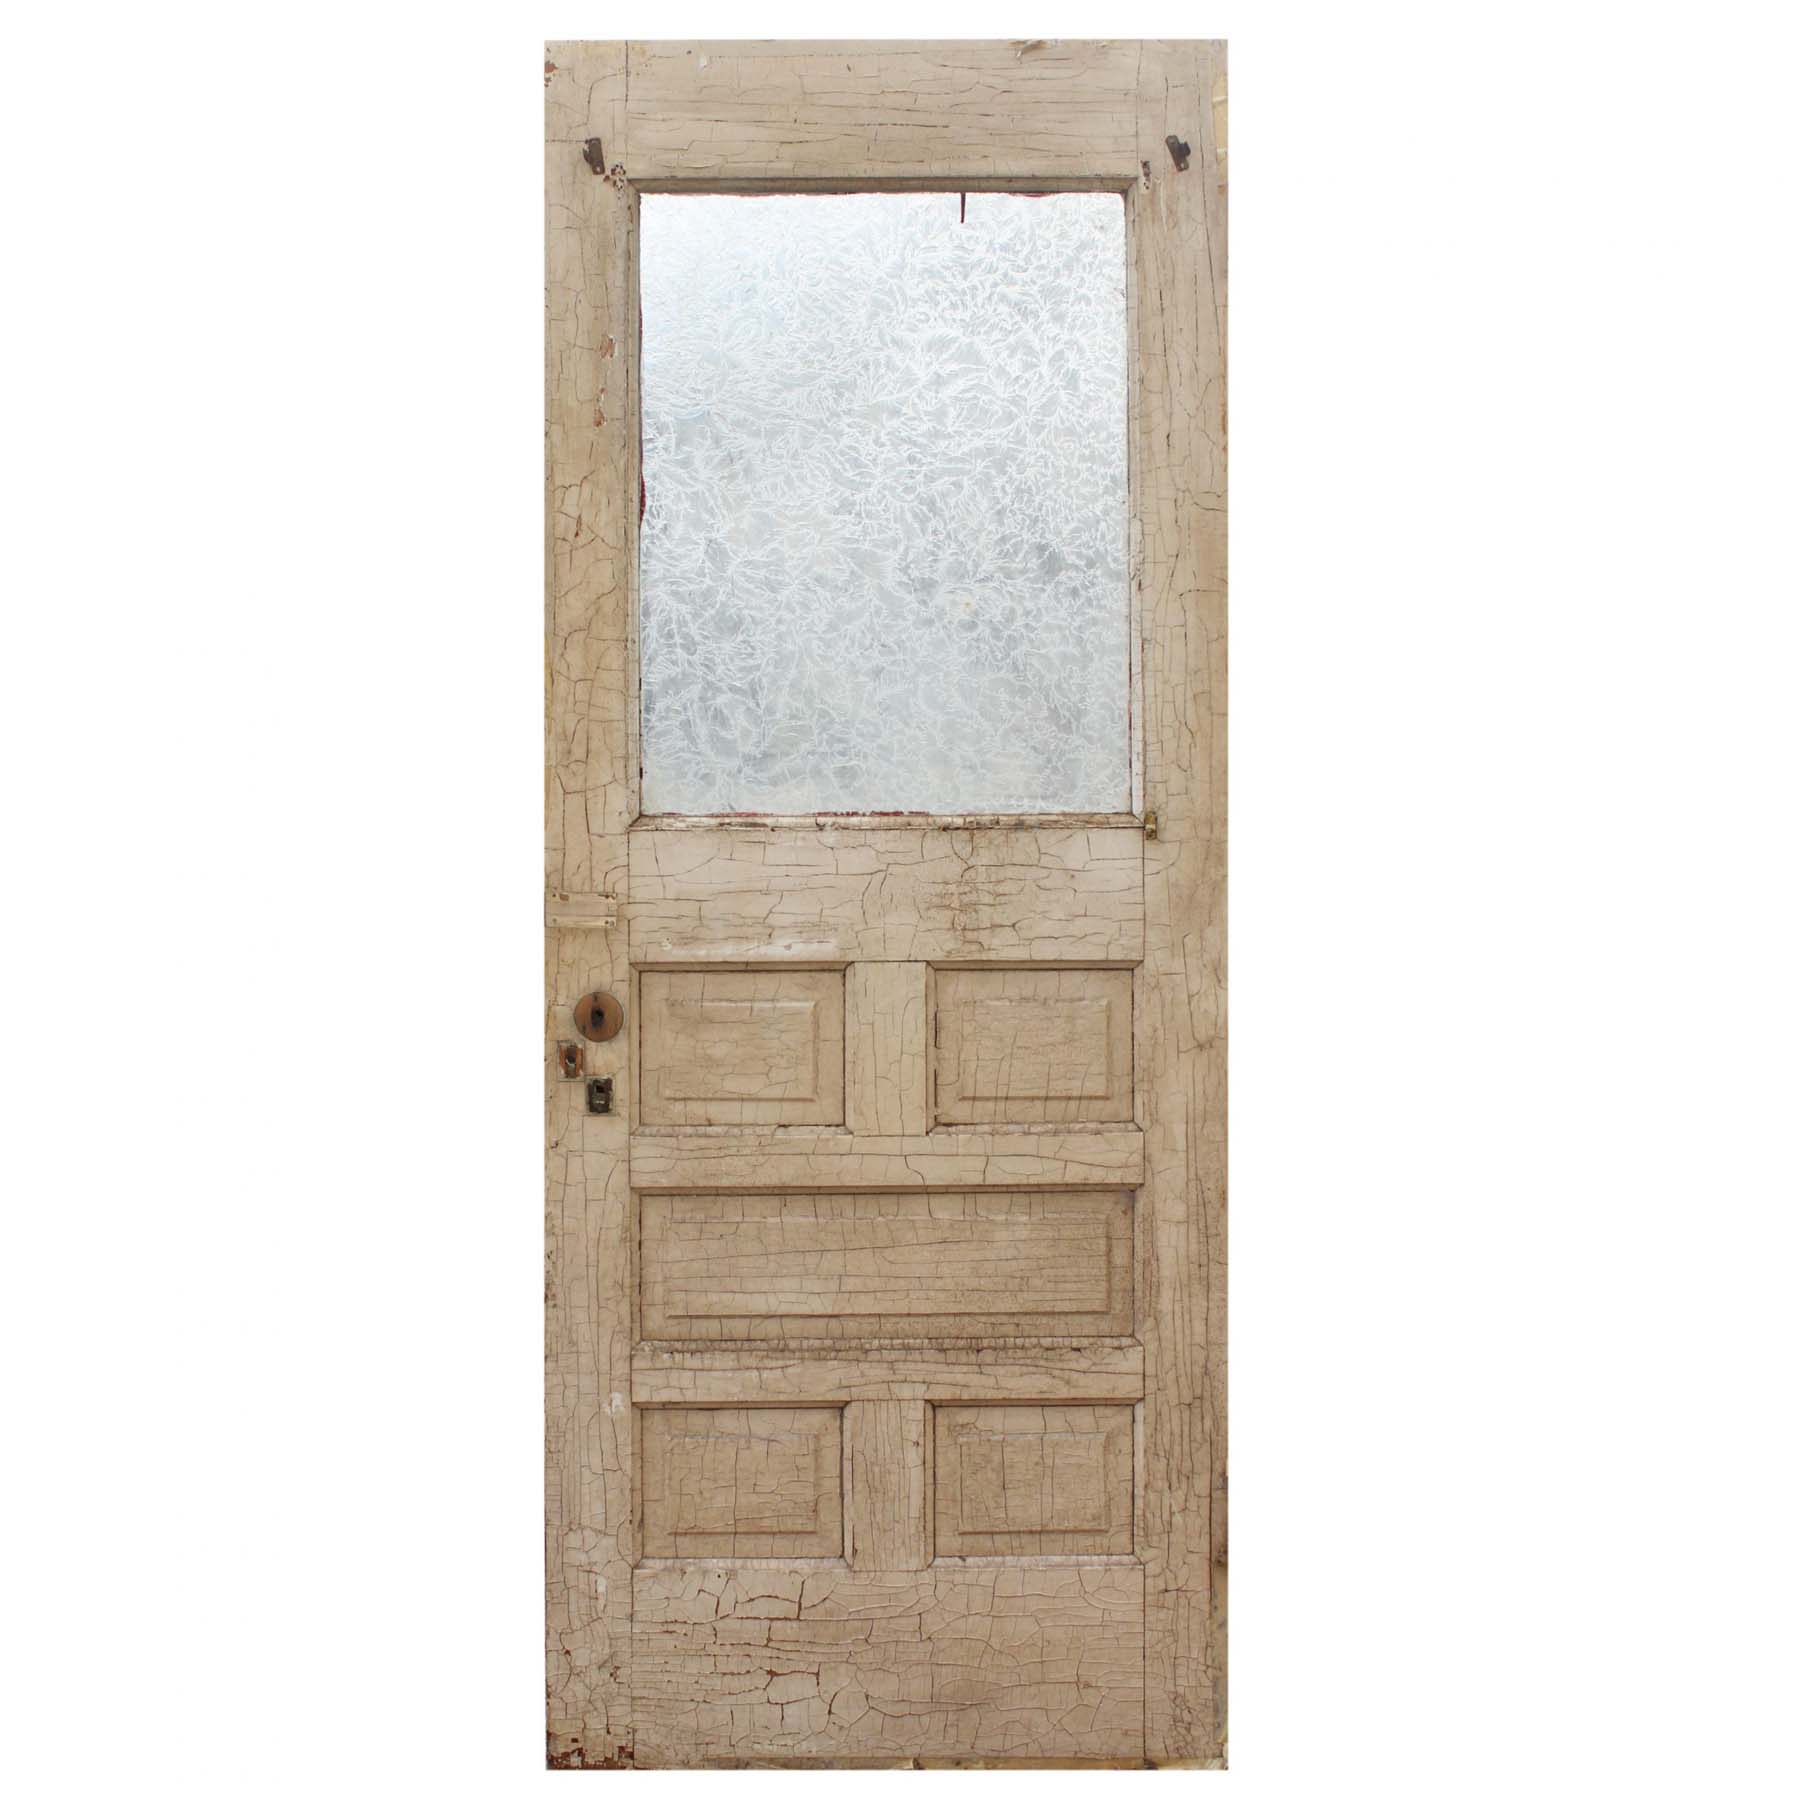 SOLD Salvaged 31" Eastlake Door with Glue Chip Glass-70251